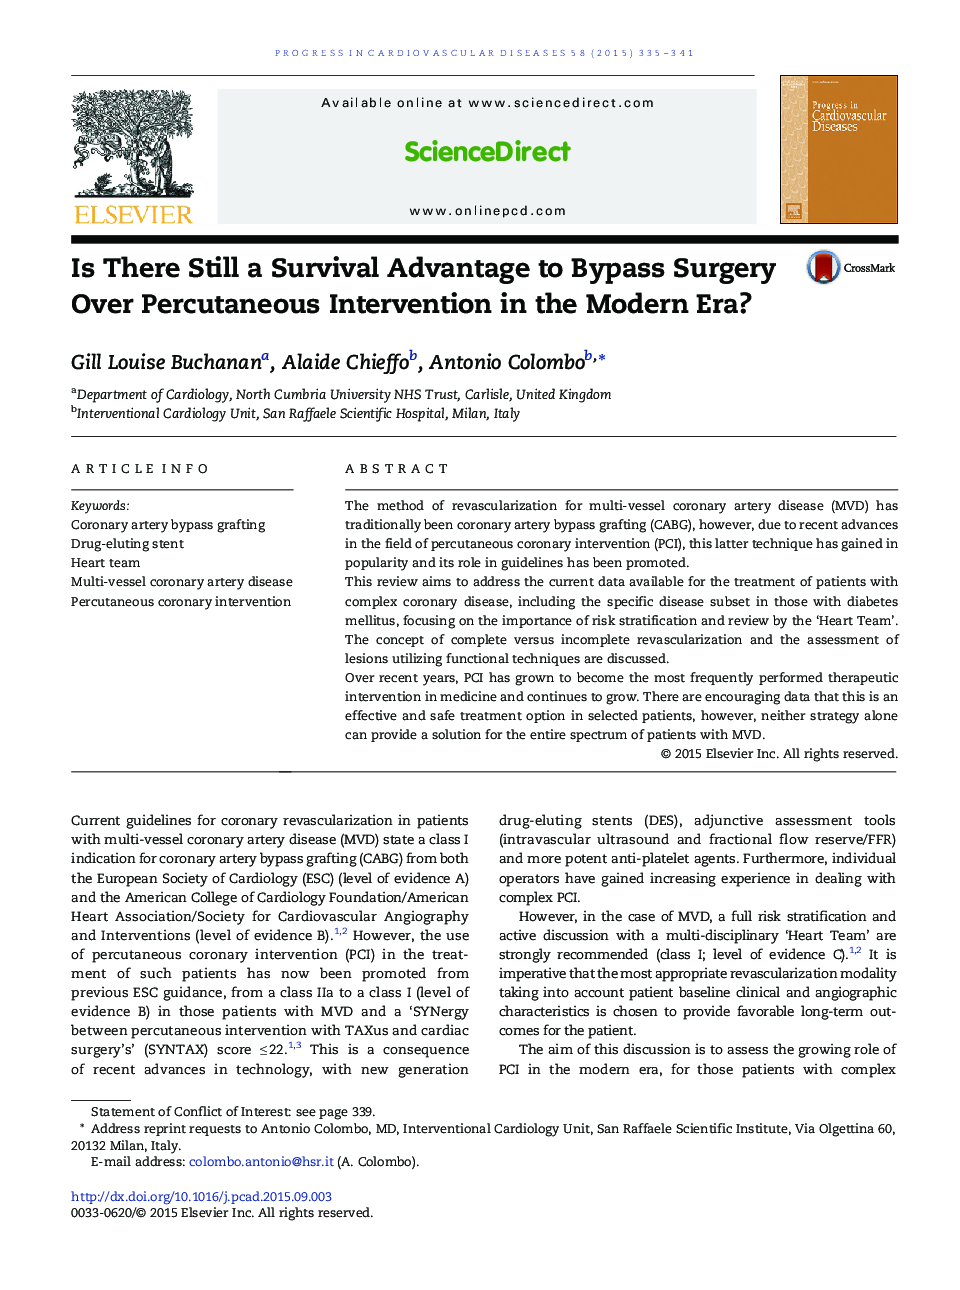 Is There Still a Survival Advantage to Bypass Surgery Over Percutaneous Intervention in the Modern Era? 